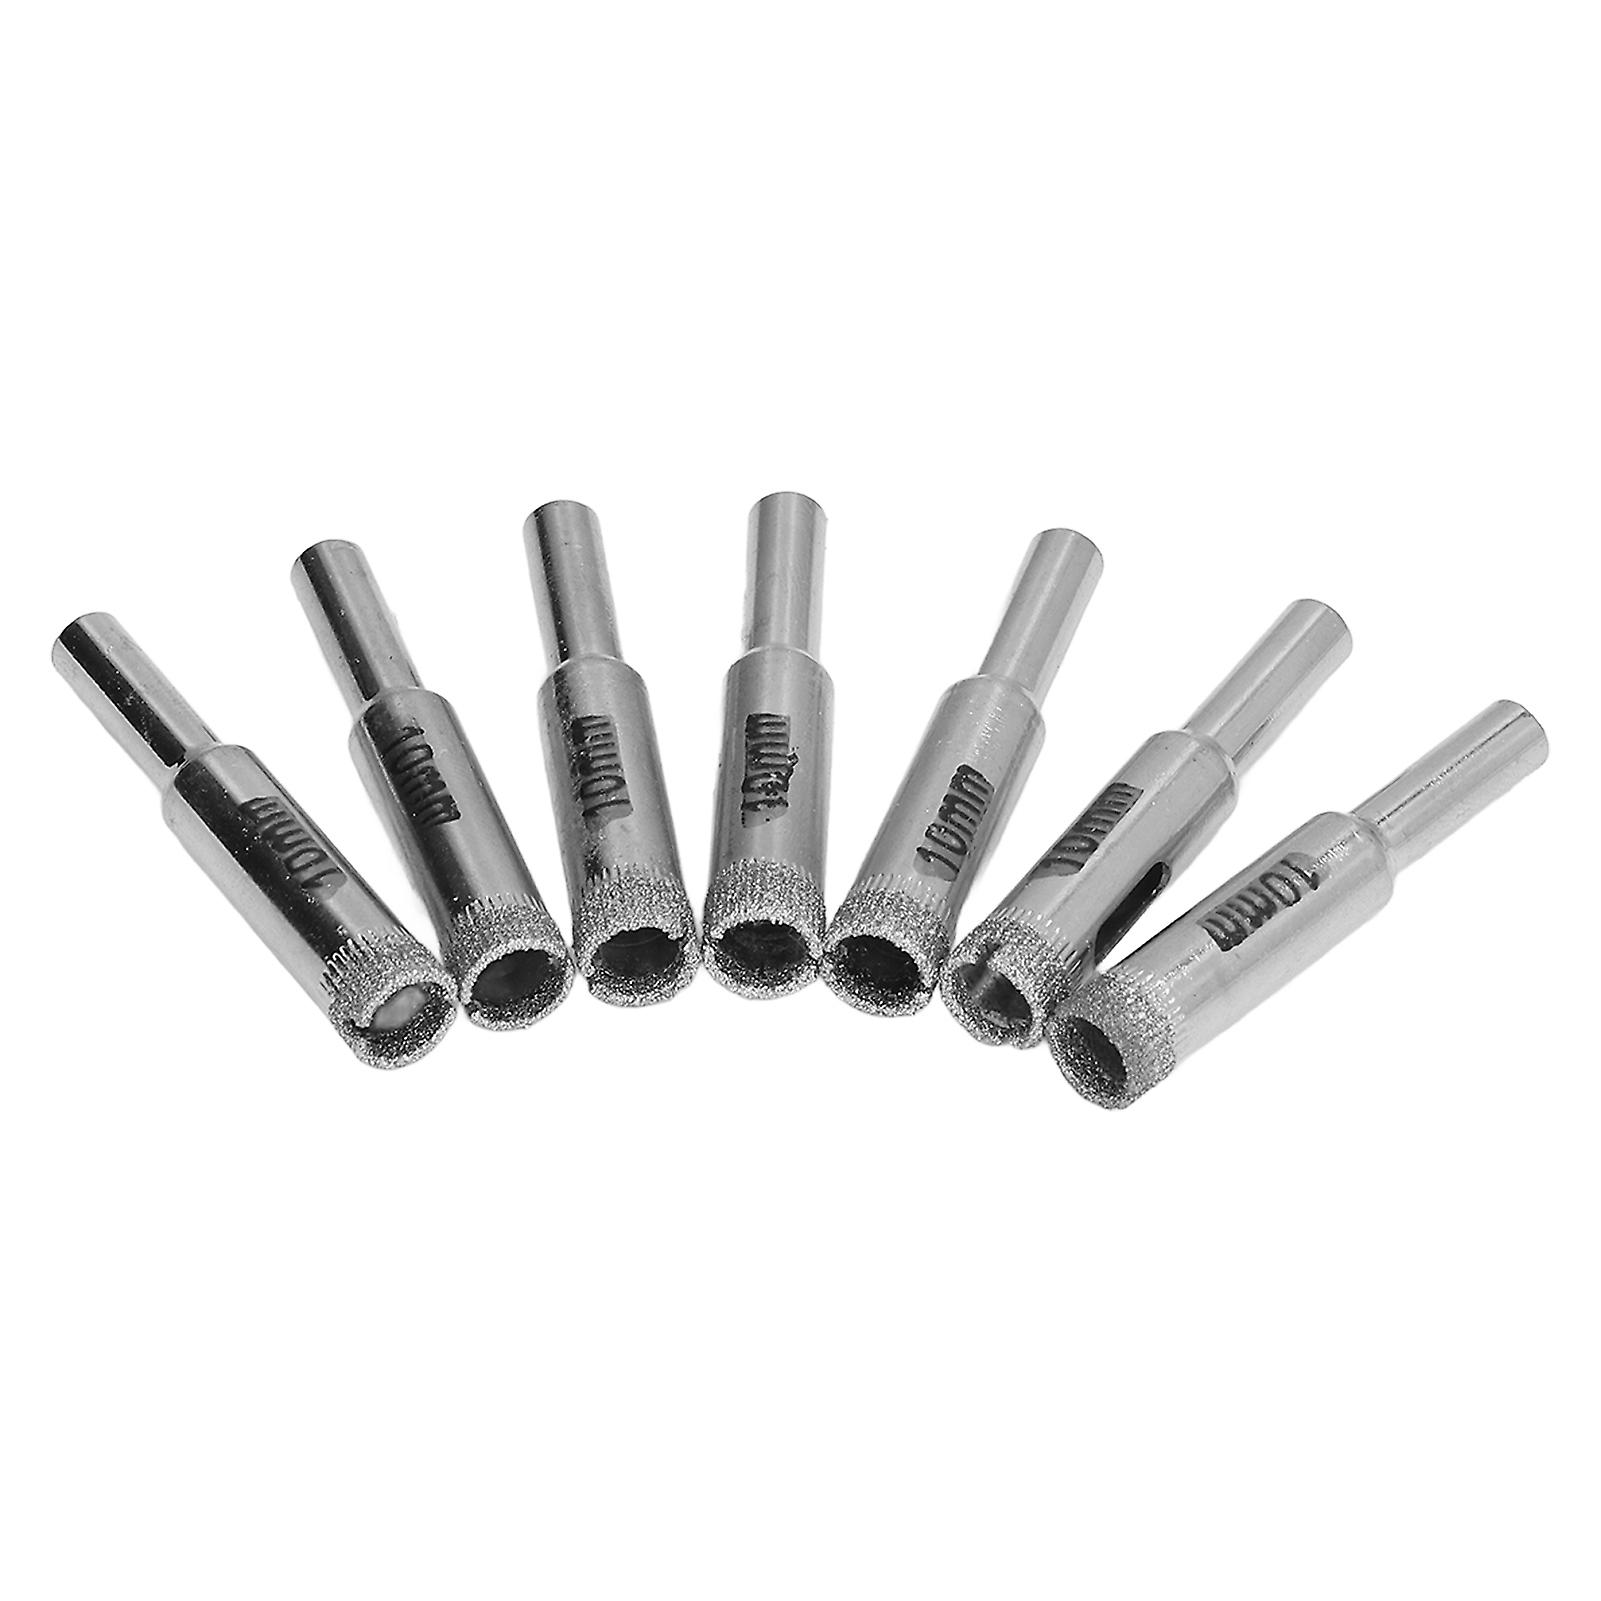 10pcs Hole Saw Drill Bit Hss Cutter Opener Tools Hardware For Glass Marble Granite Stone 10mm